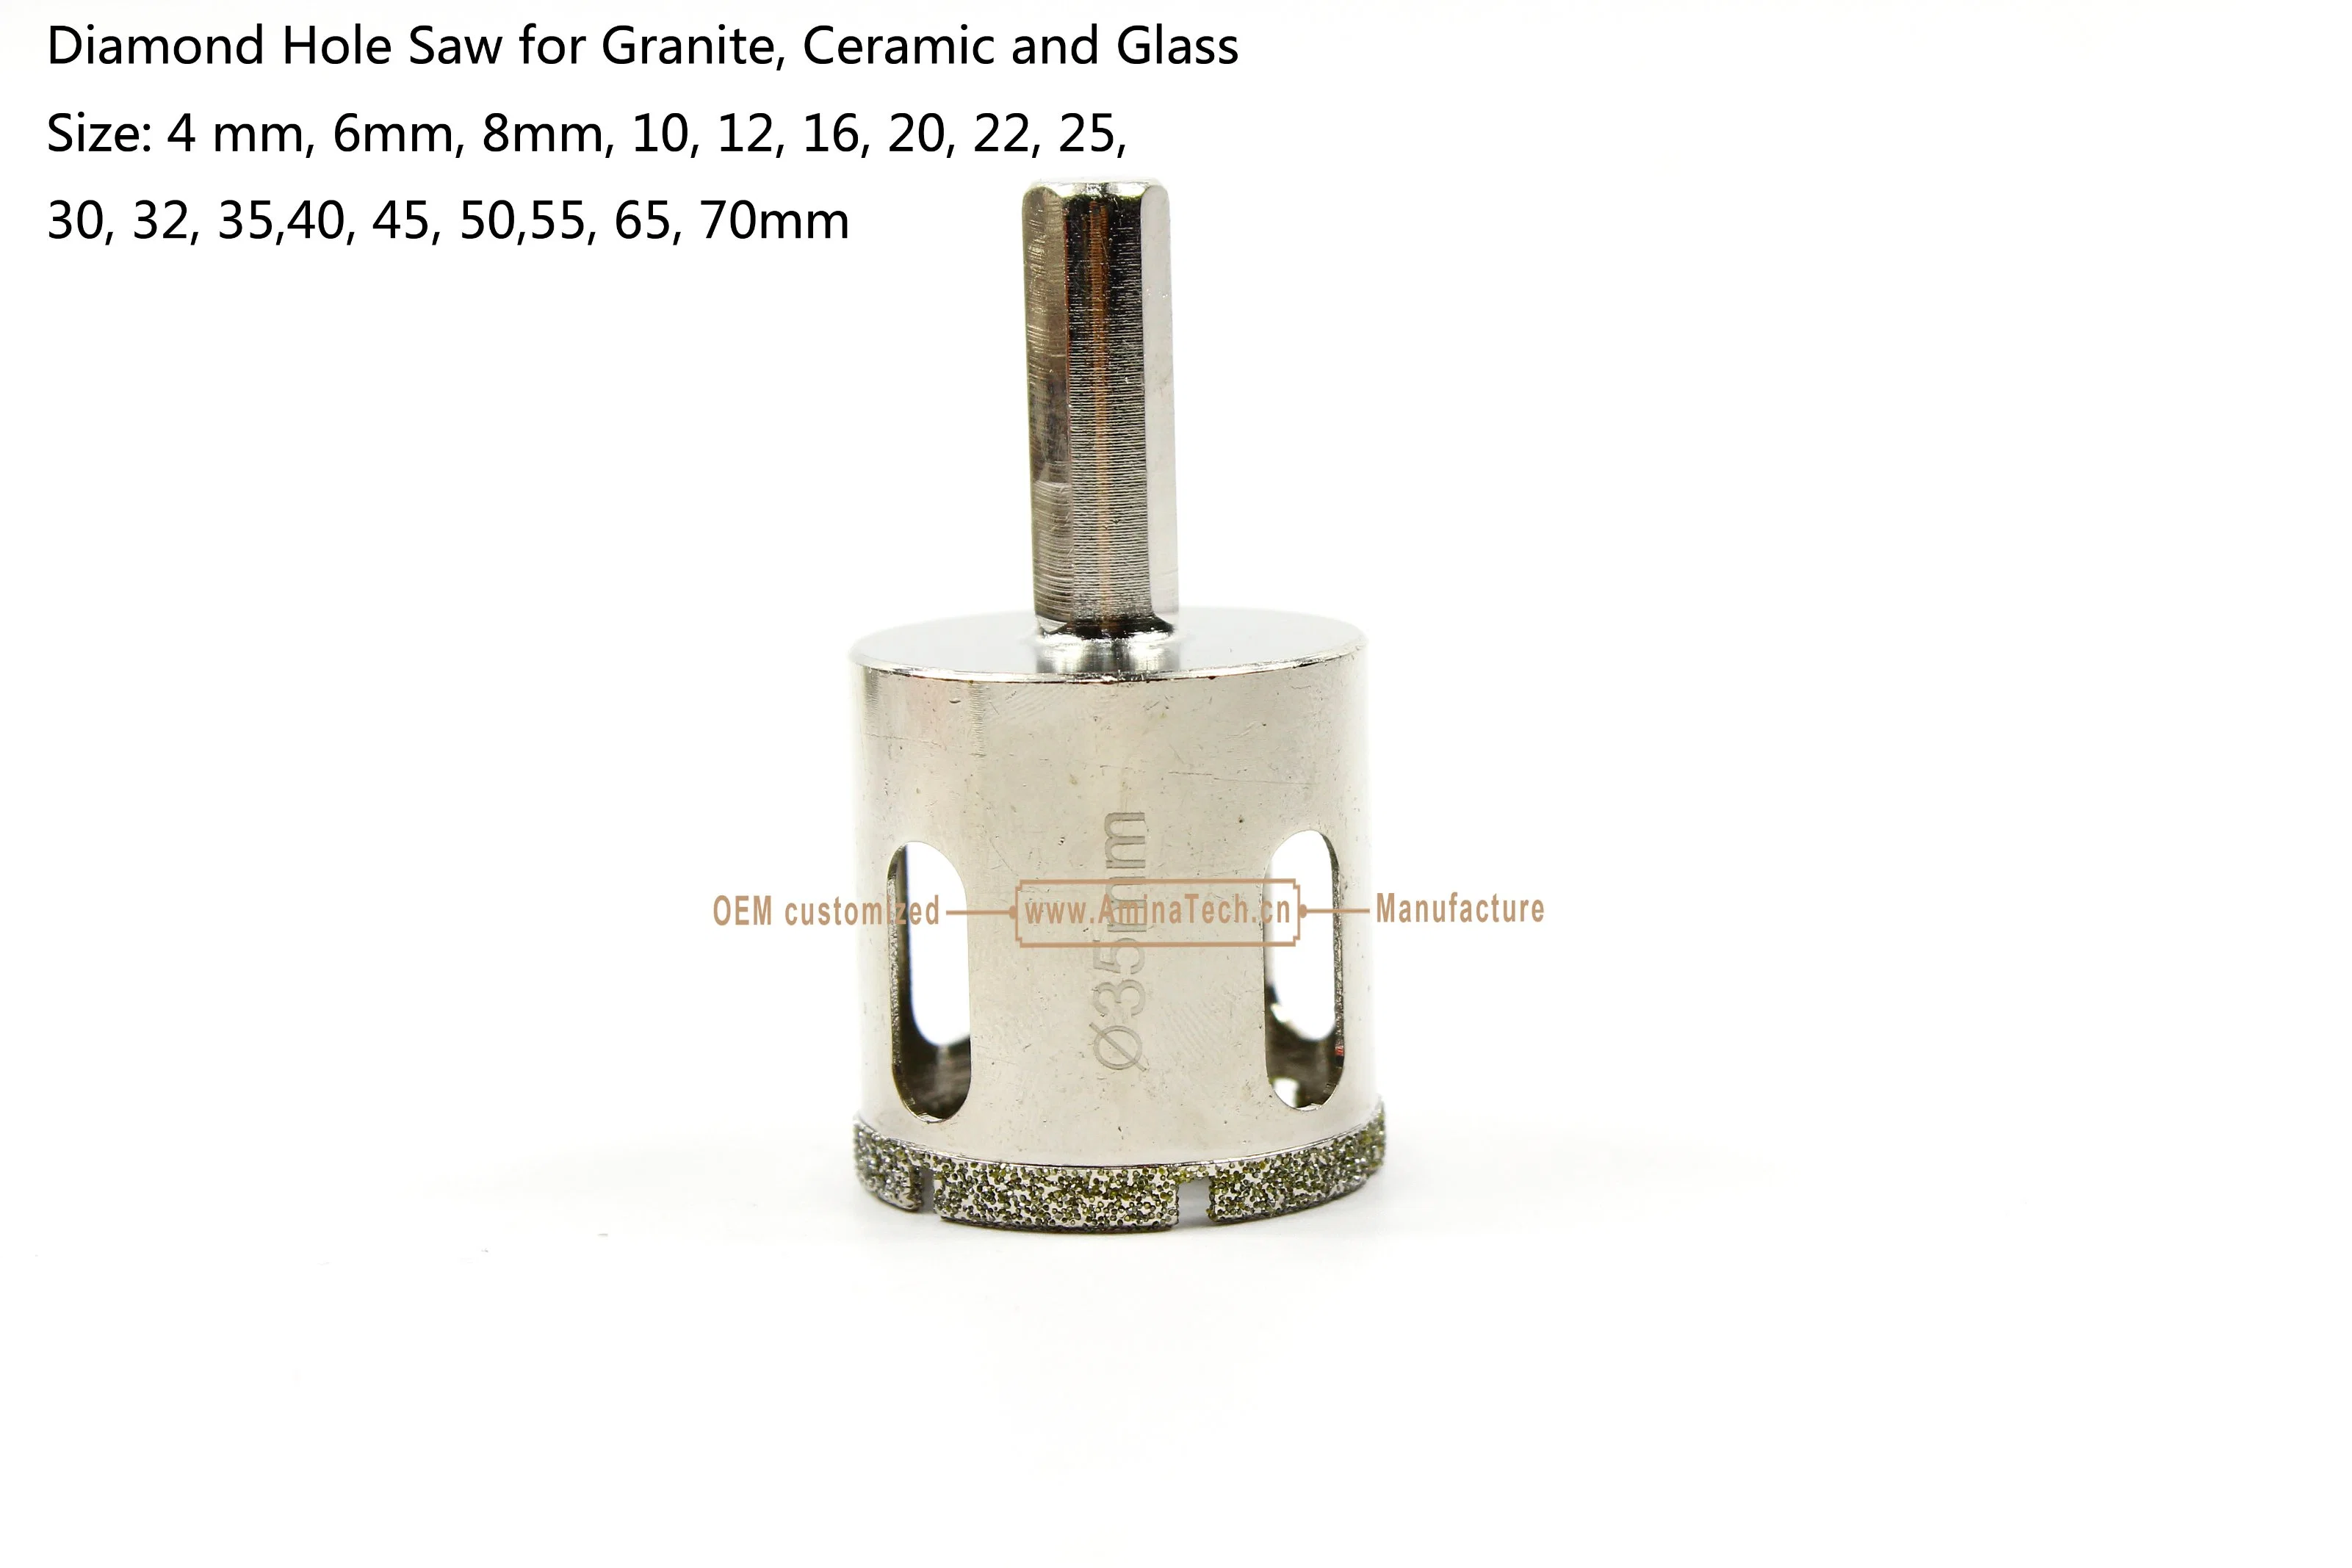 Diamond Hole Saw for Granite, glass and granite hole,Power Tools,Drill